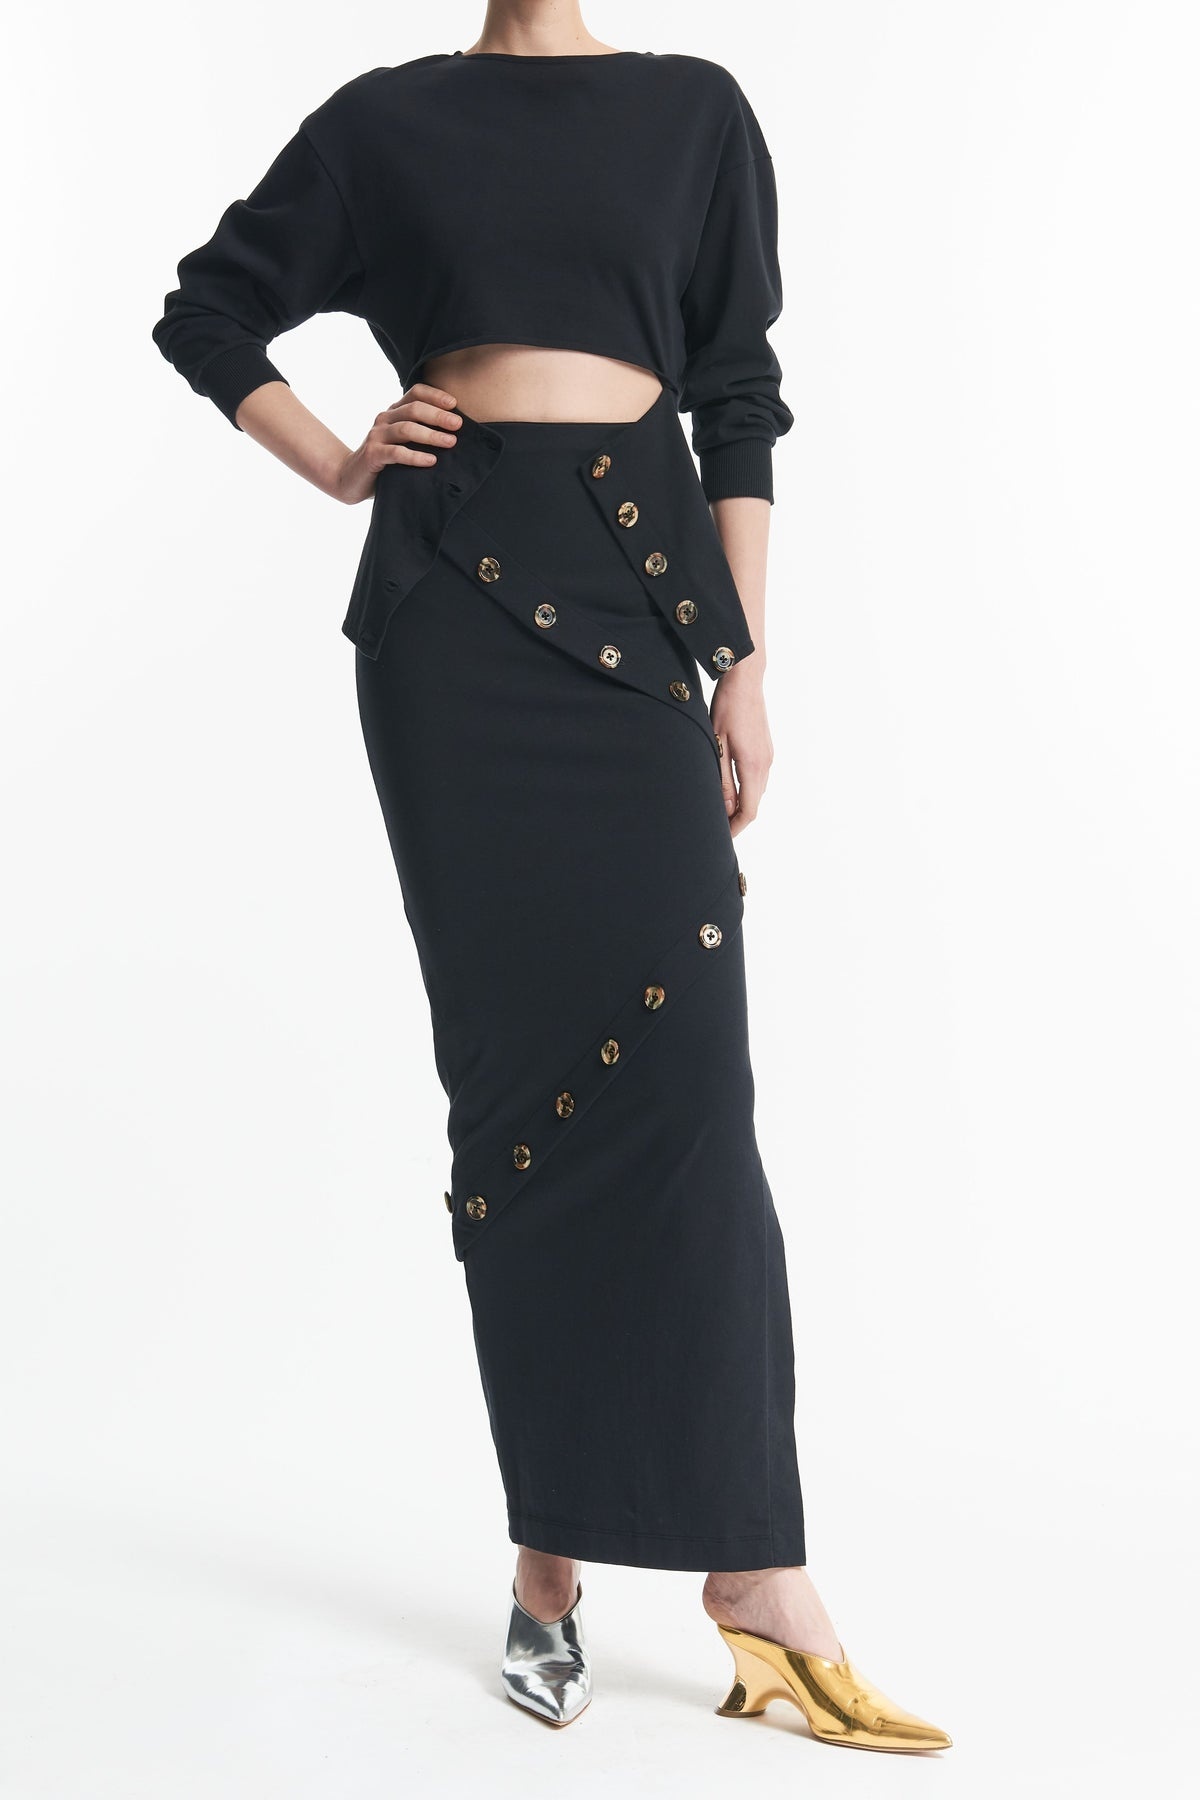 FITTED JERSEY MAXI SKIRT BLACK - 5